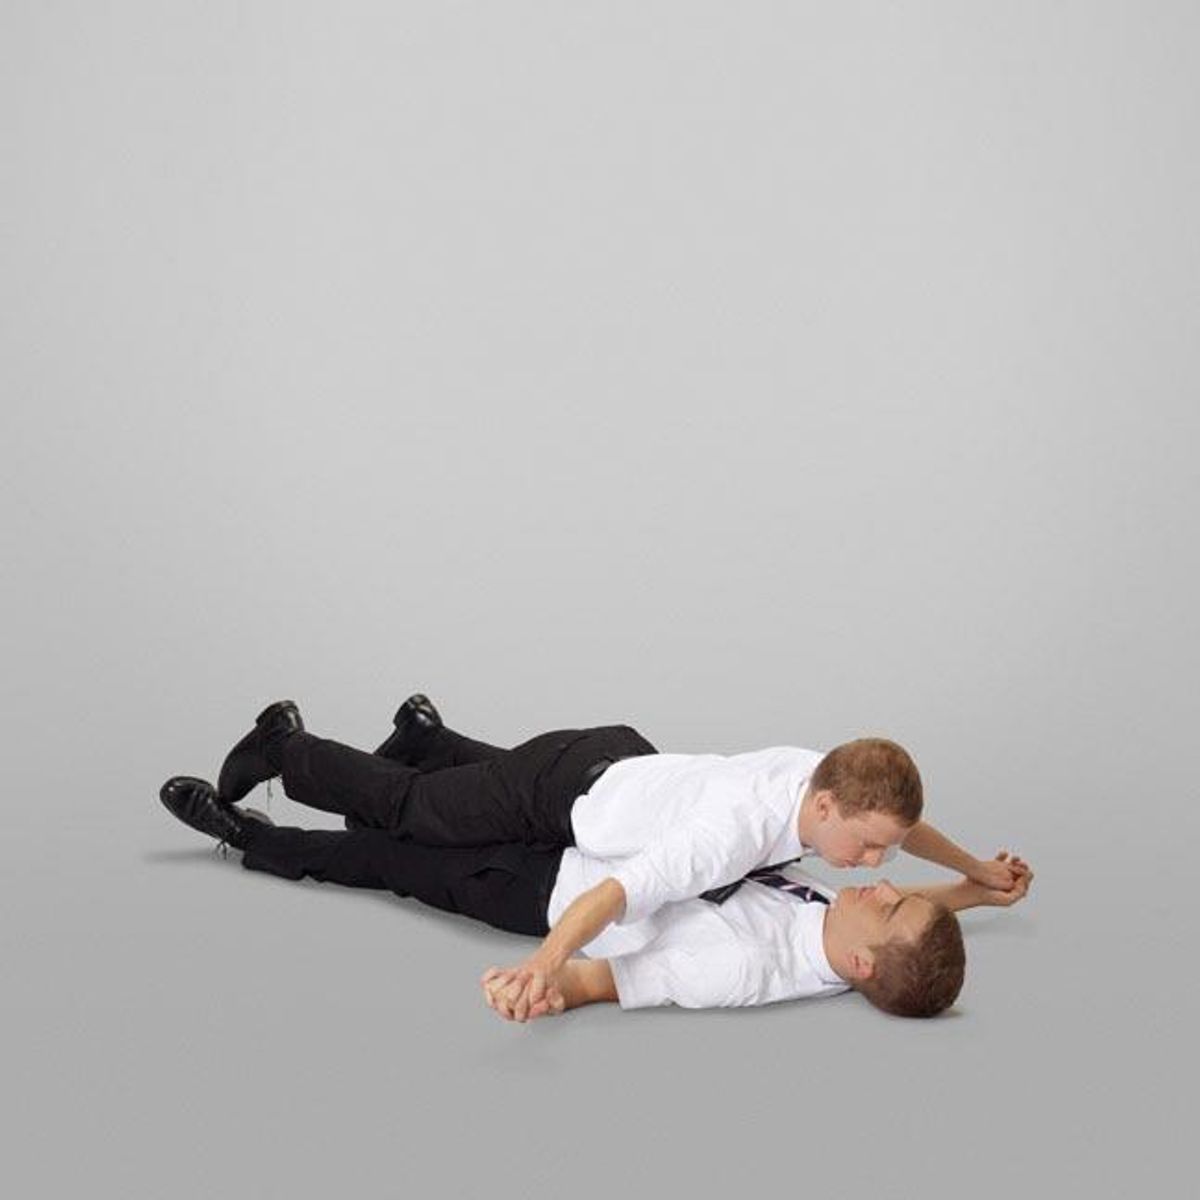 16 Mormon Missionary Positions You Should Try 0126